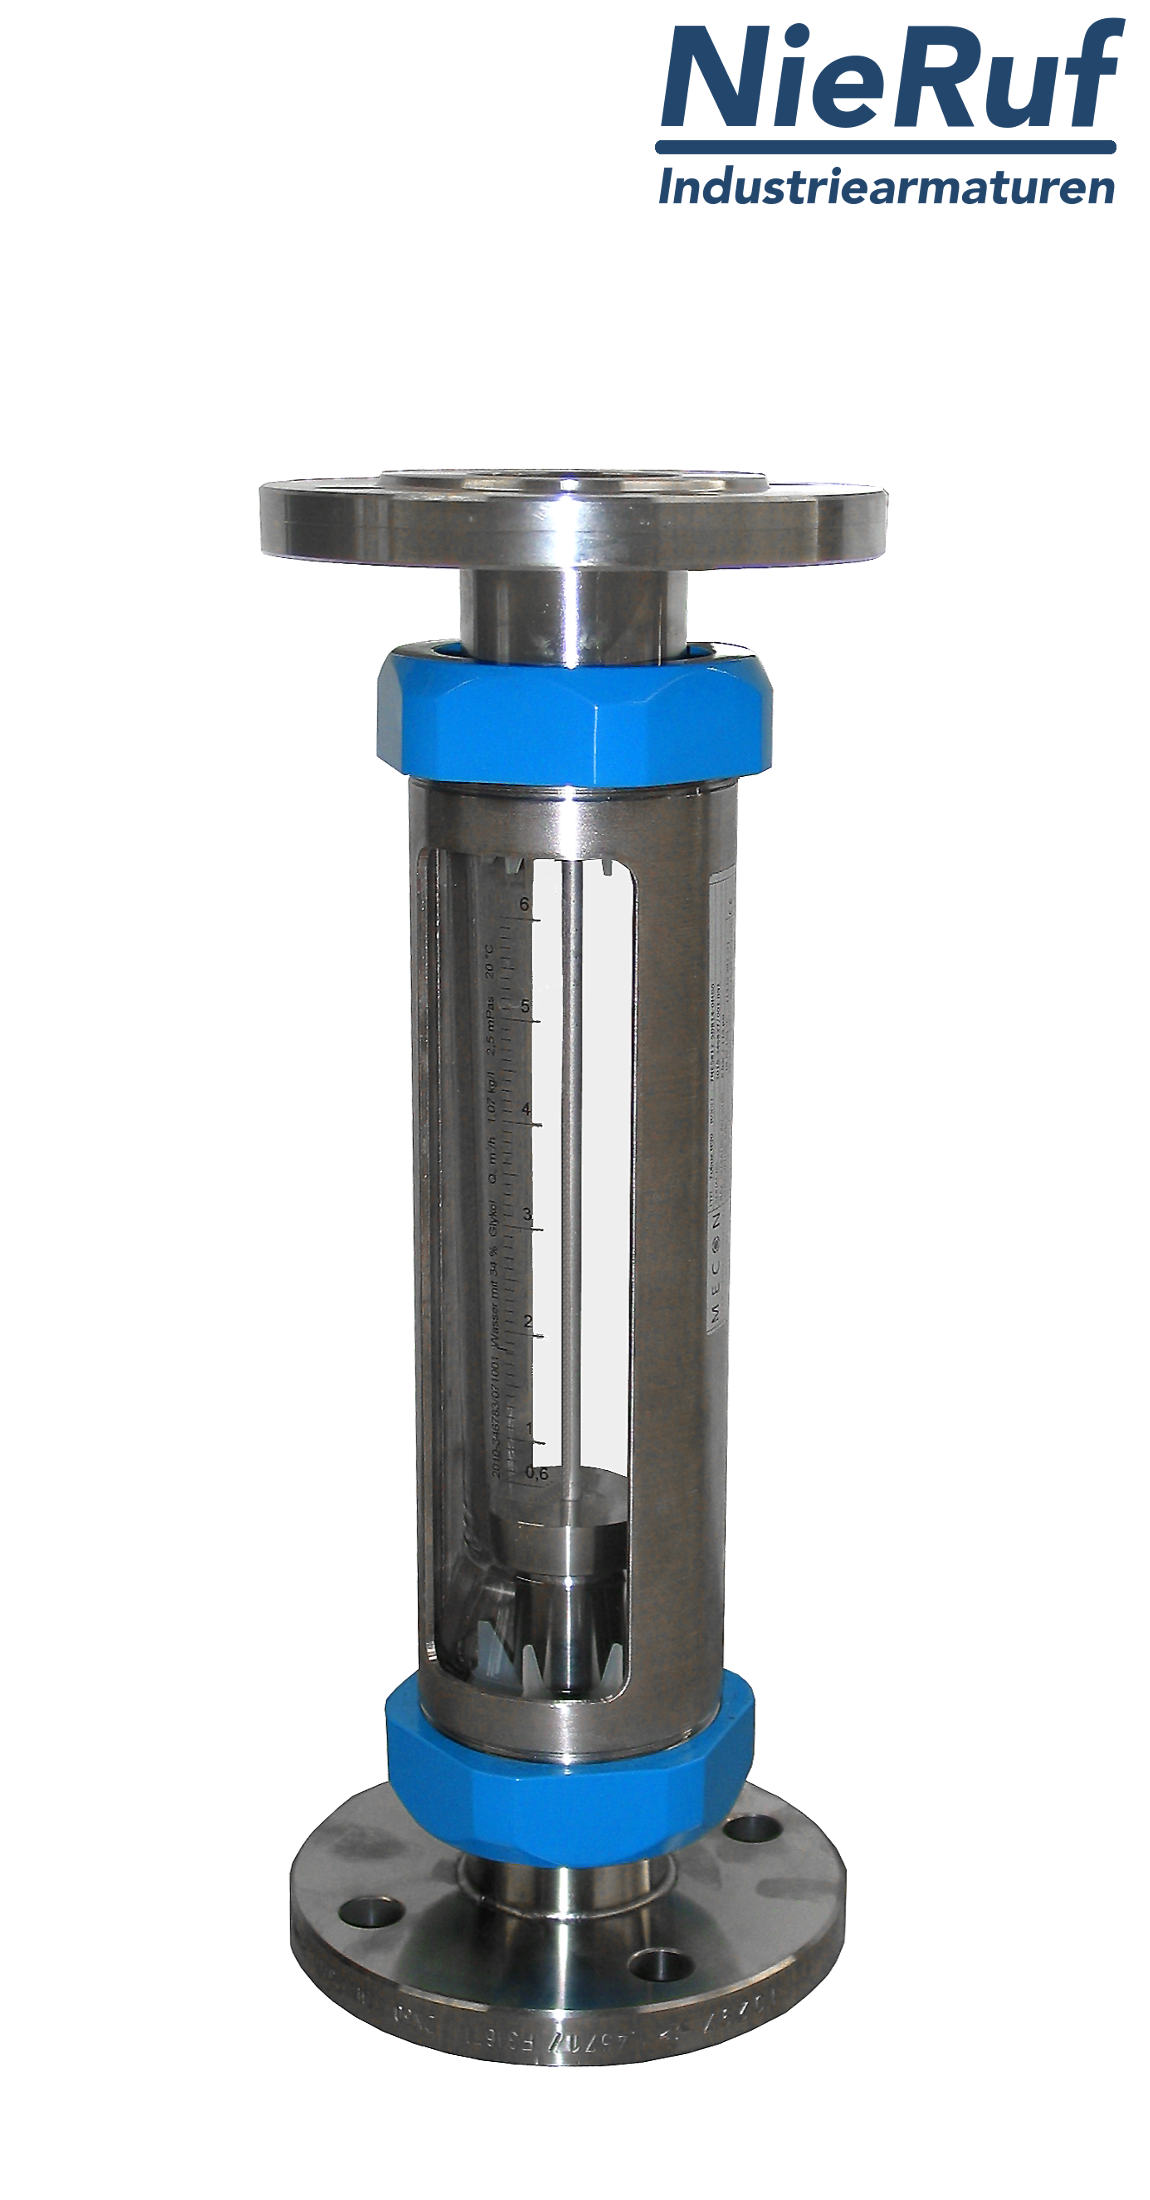 Variable area flowmeter stainless steel + borosilicate flange DN50 500.0 - 5000 l/h water FKM